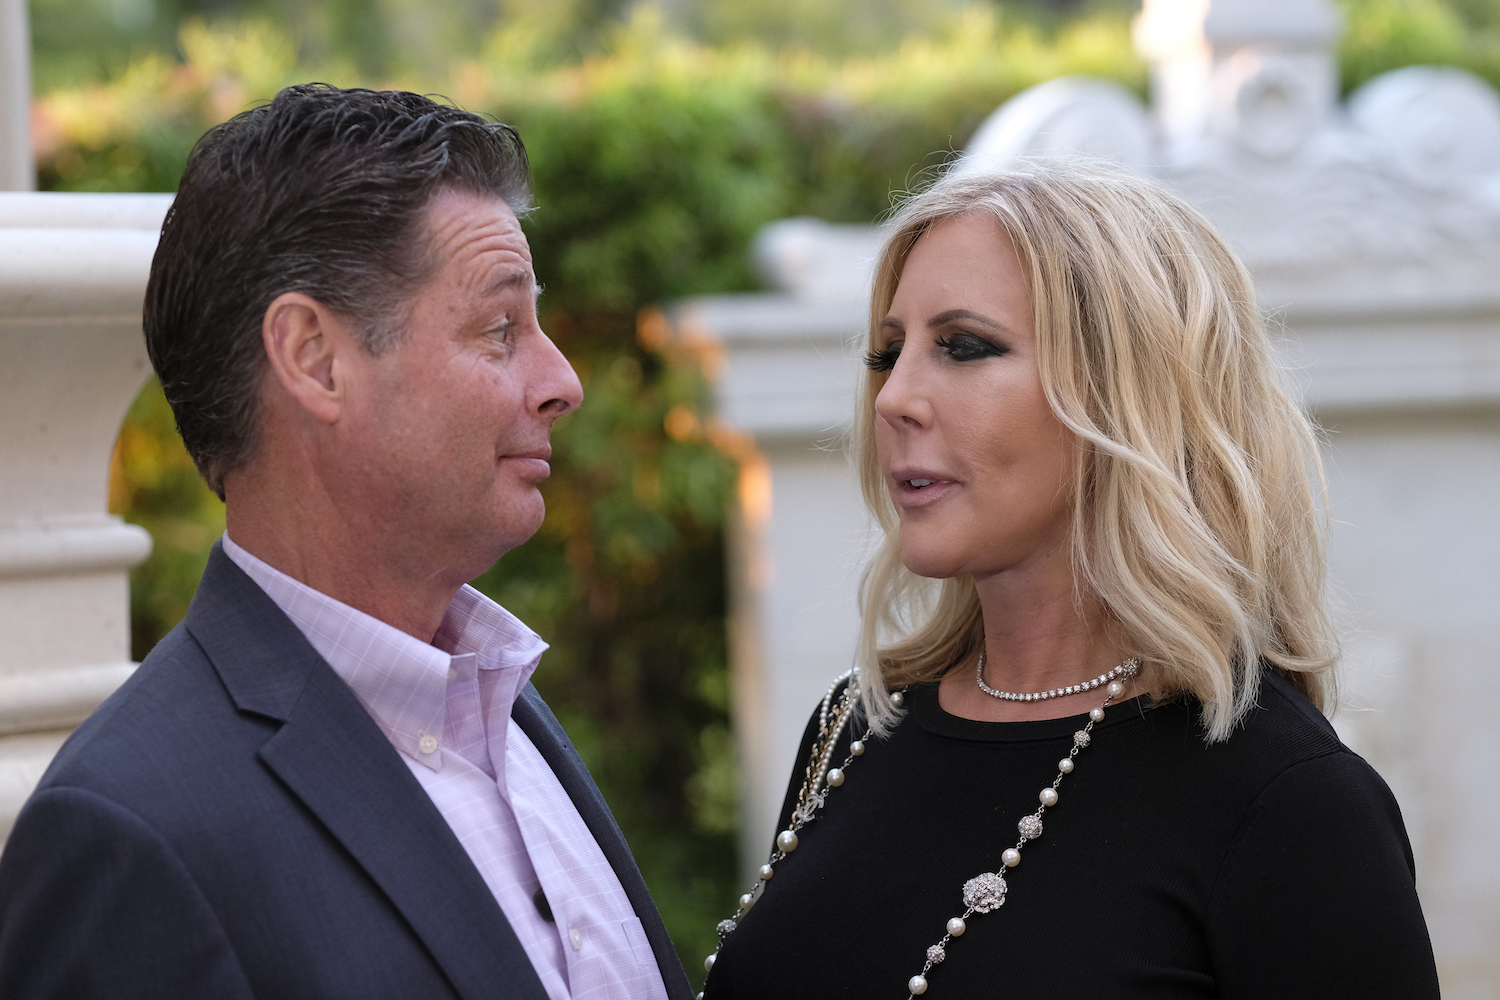 Steve Lodge wearing a suit looking at Vicki Gunvalson, wearing a black top and necklace.